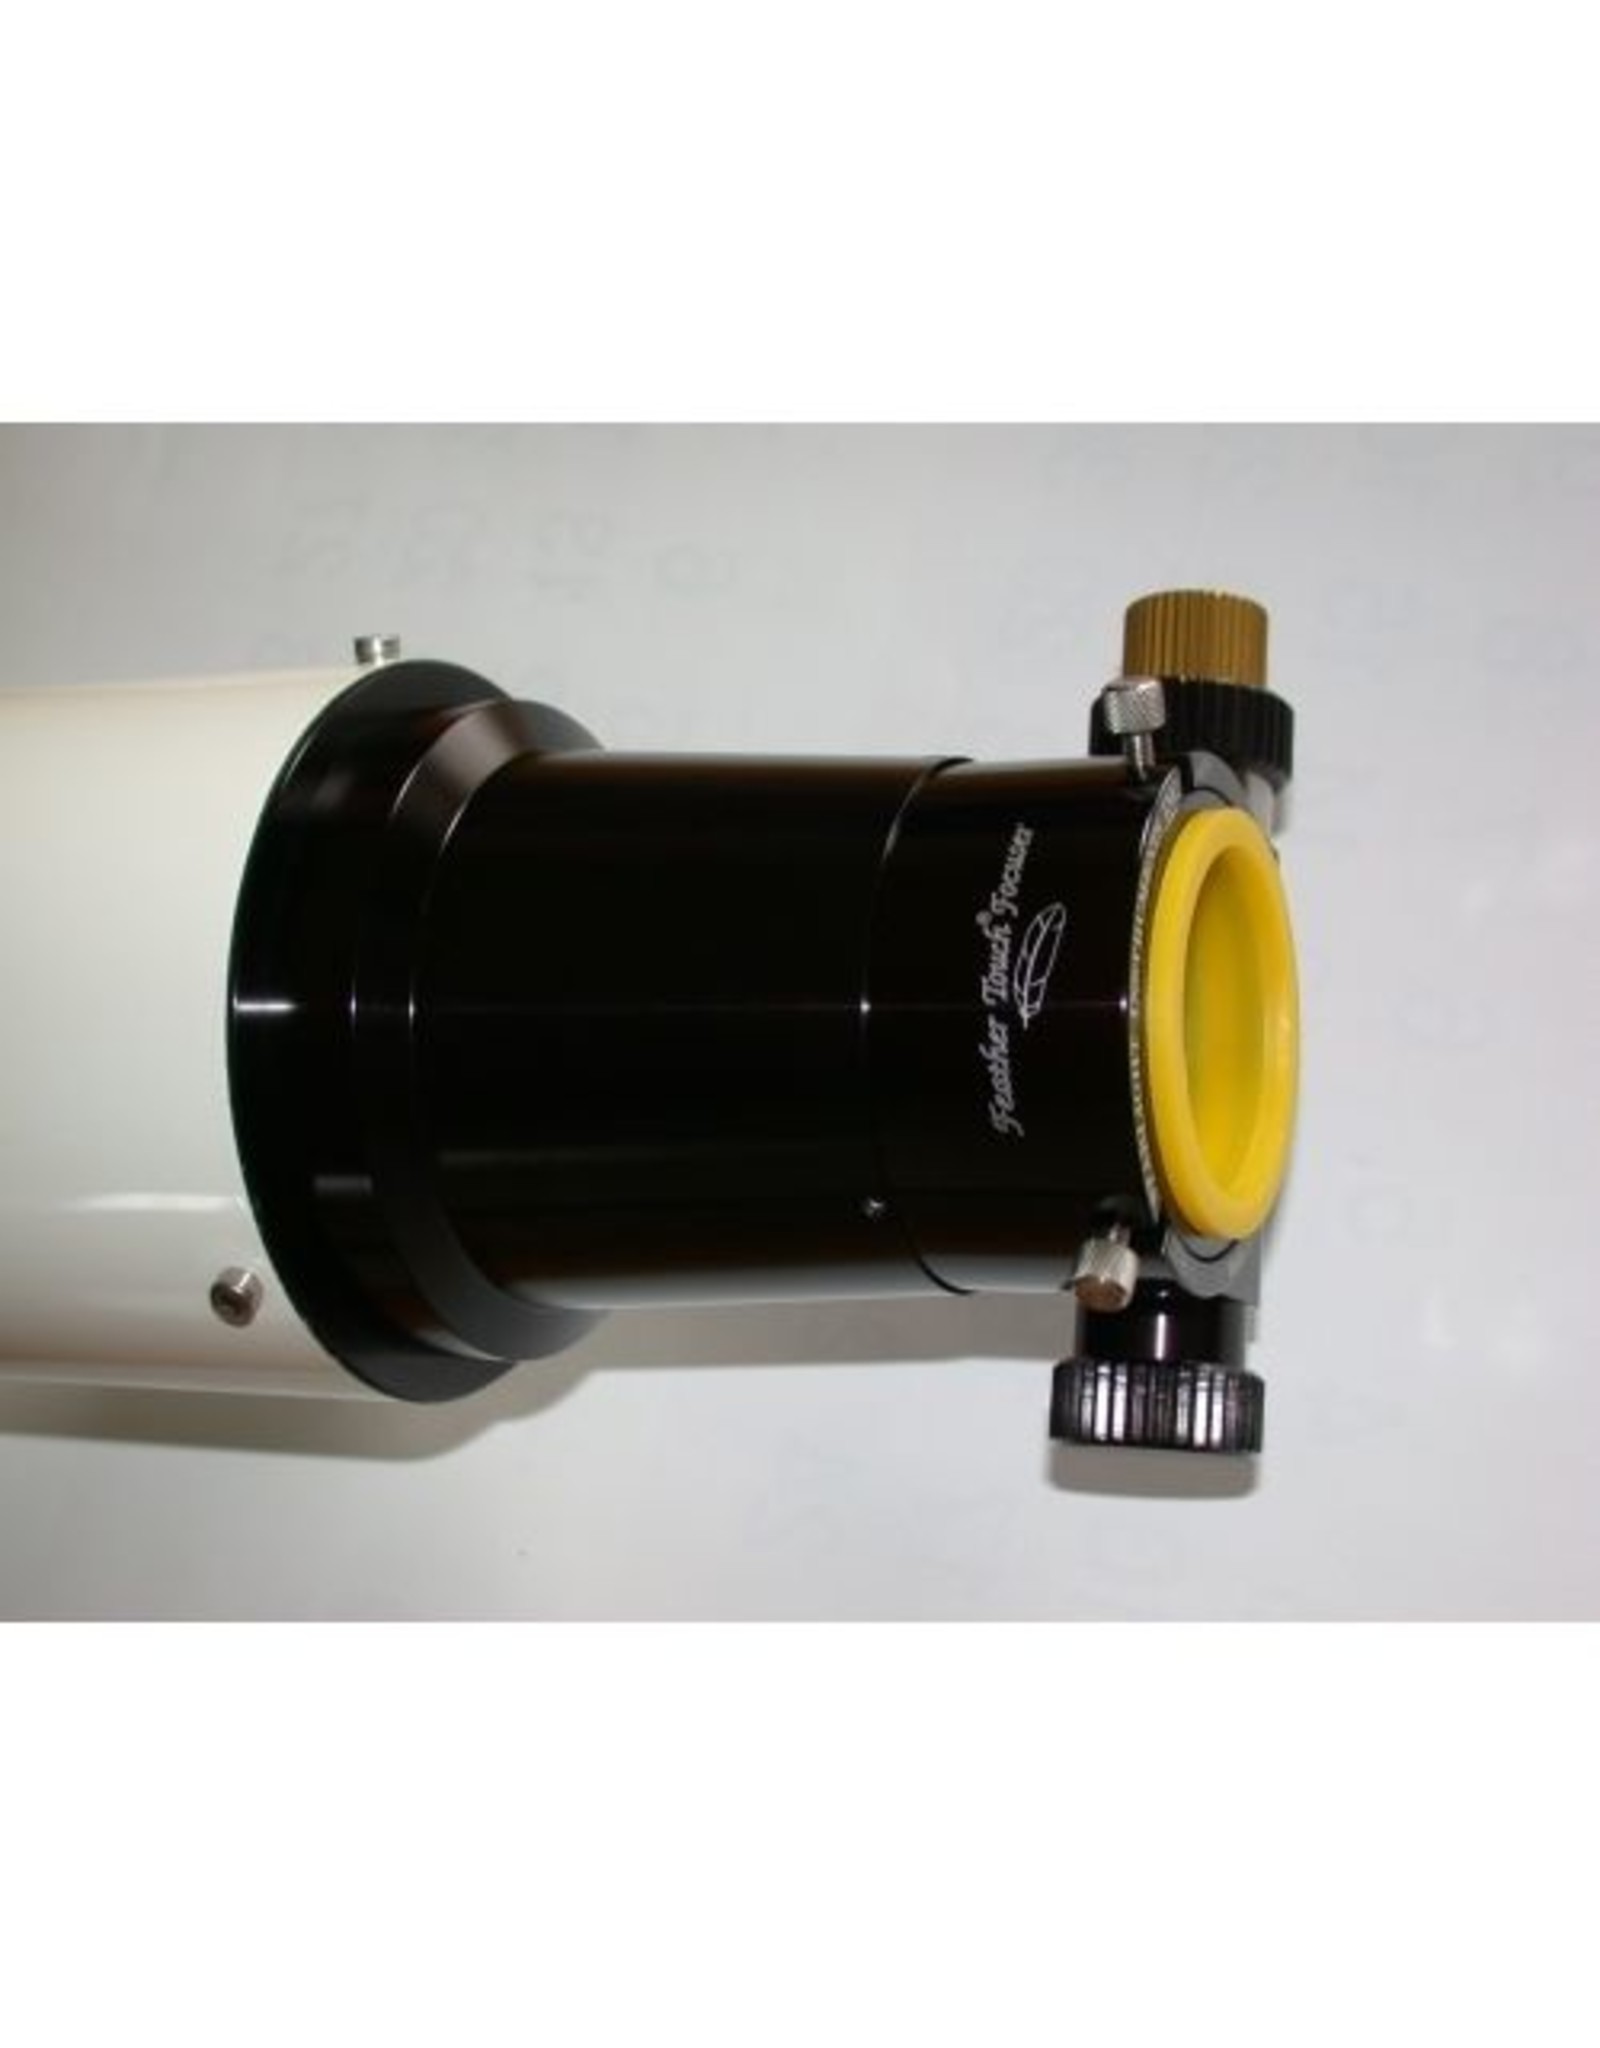 Feathertouch Feathertouch A20-288--Adapter 2.0" - (fits Vixen Fluorite 102/900 Refractor, Meade 102-f9, OS-1 + Step Up Adapter)